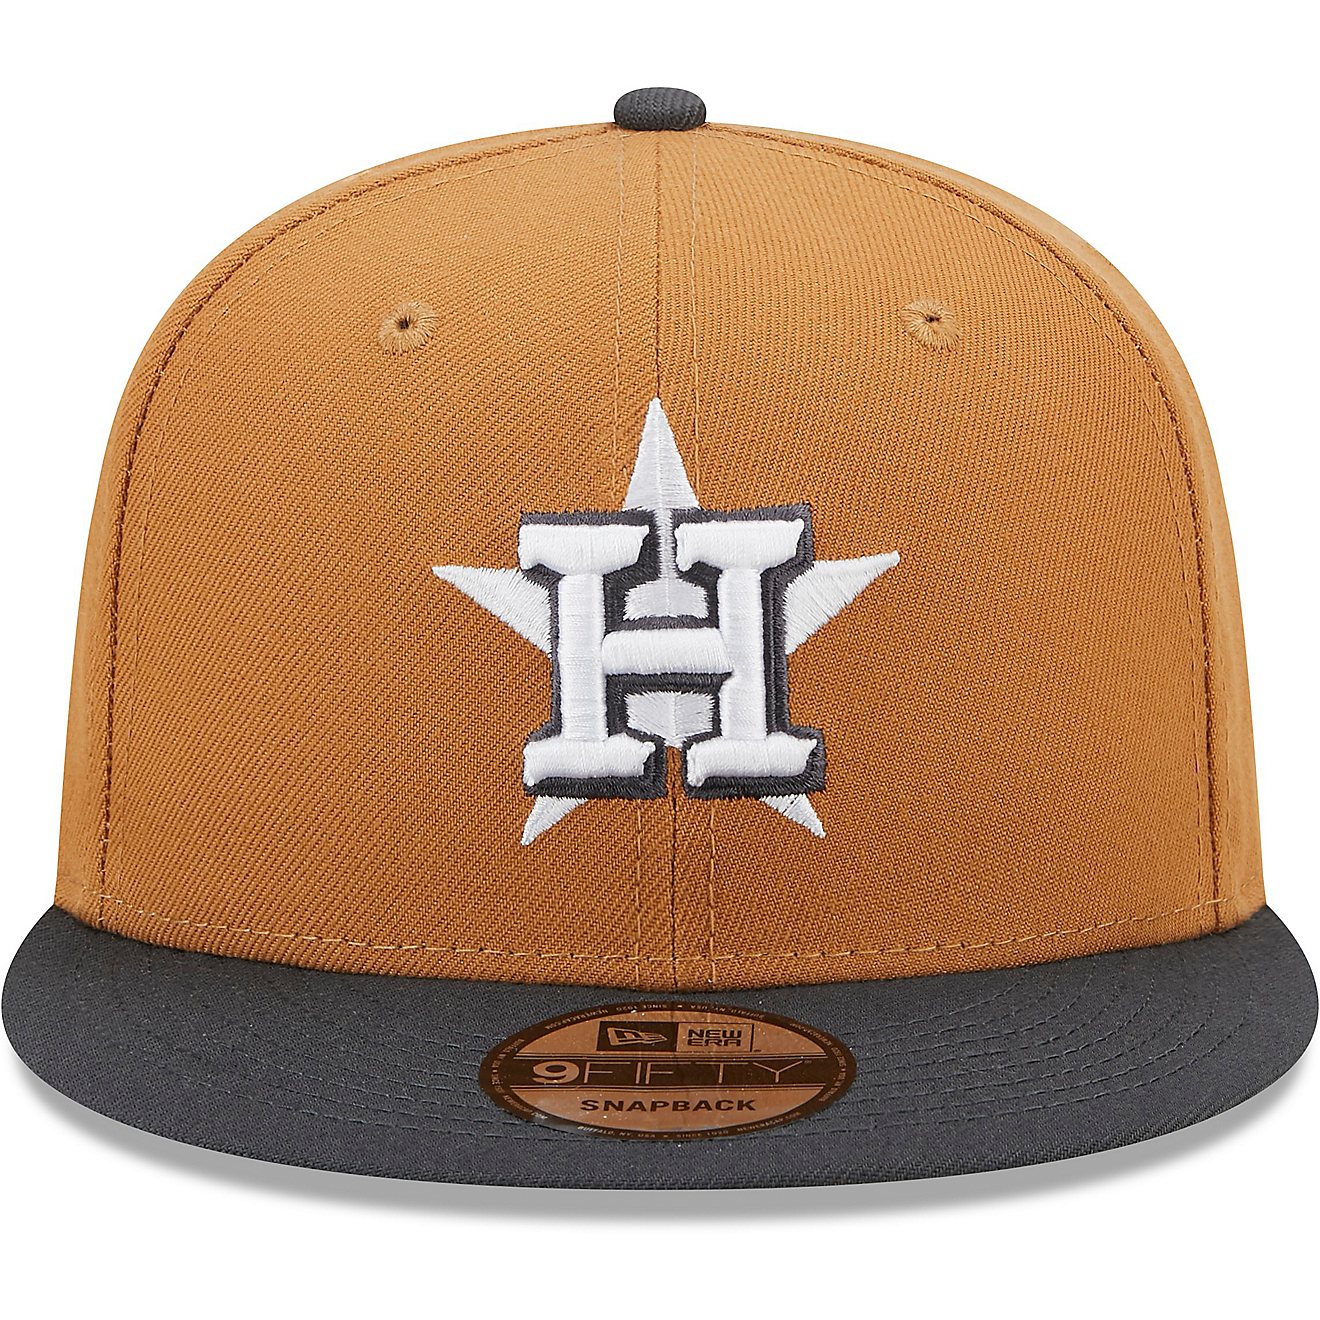 New Era Men's Houston Astros 2-Tone Pack 9FIFTY Cap                                                                              - view number 2